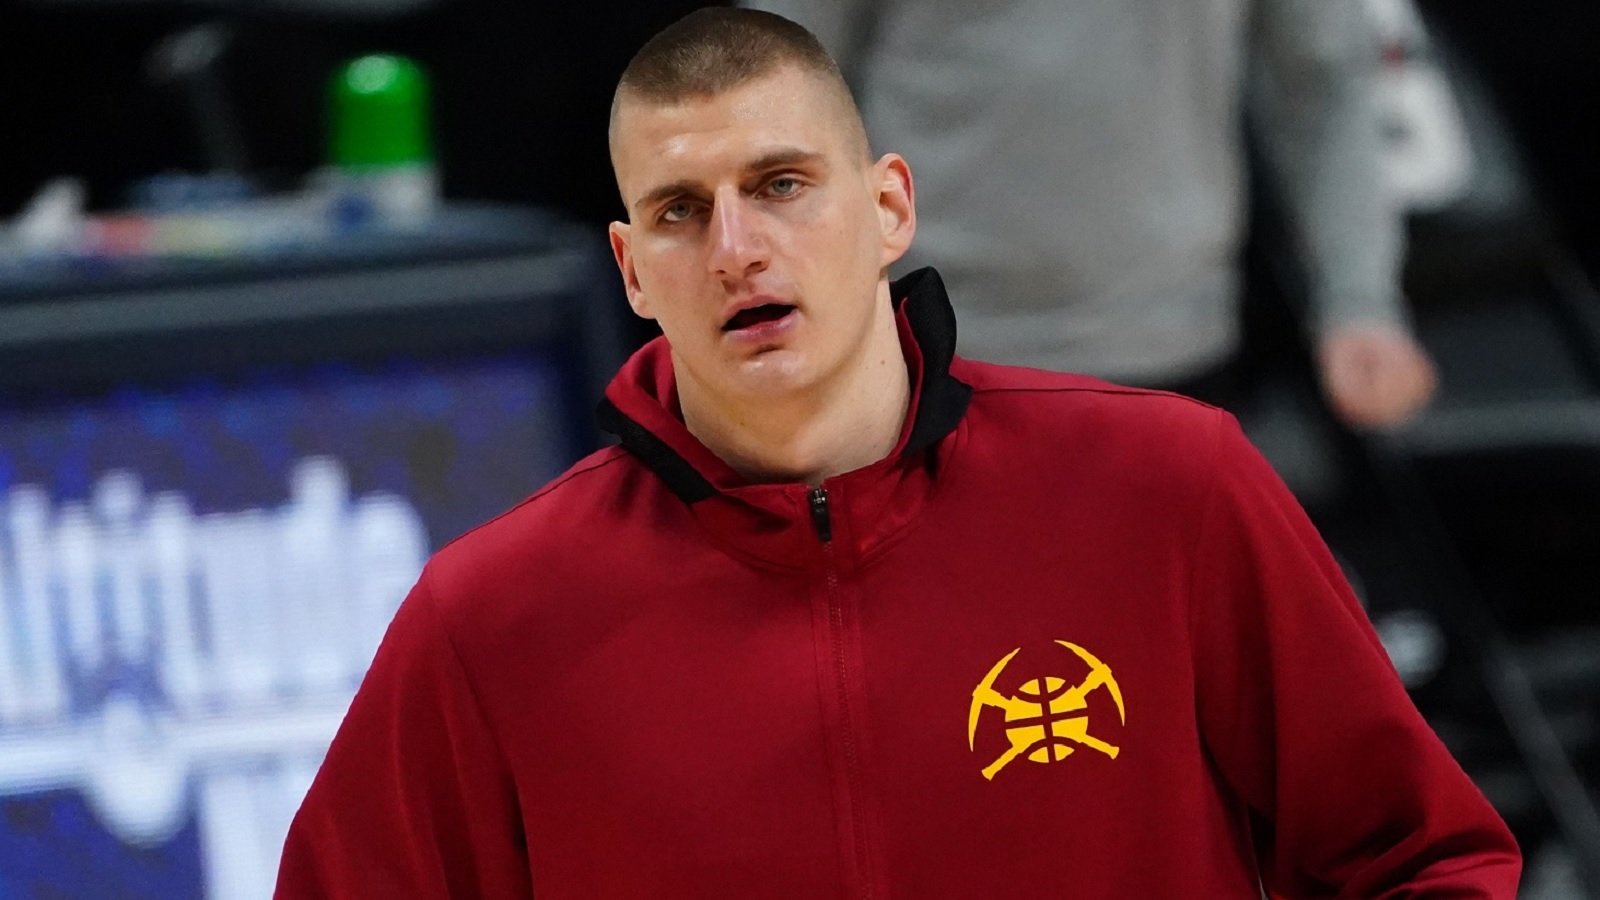 Never forget Nikola Jokic was drafted during a taco bell commercial